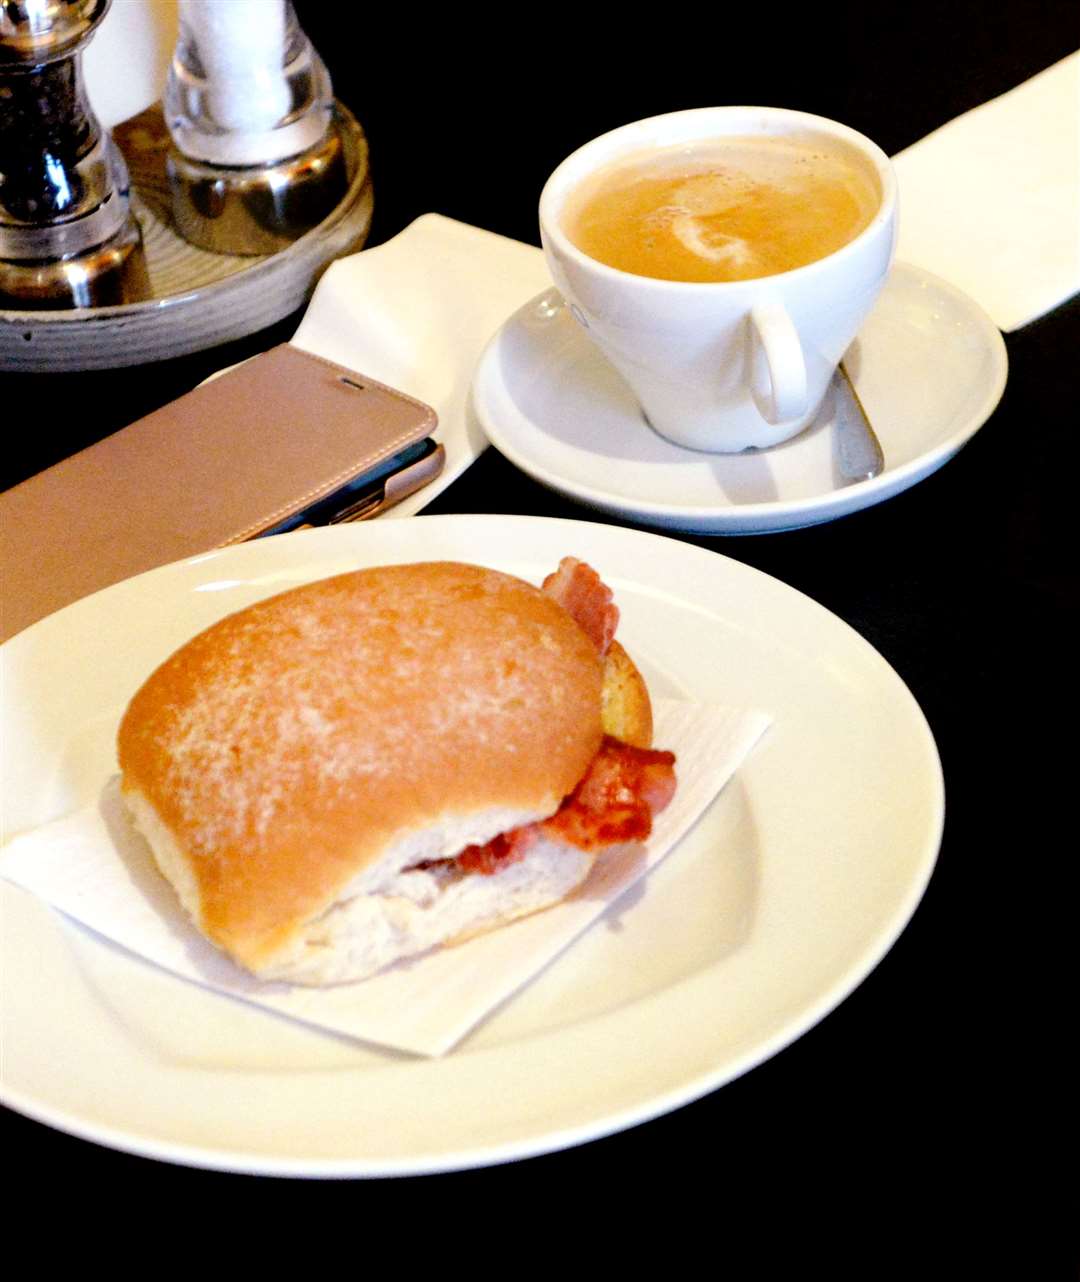 Bacon roll and a coffee – or do you prefer a heartier start to your day?